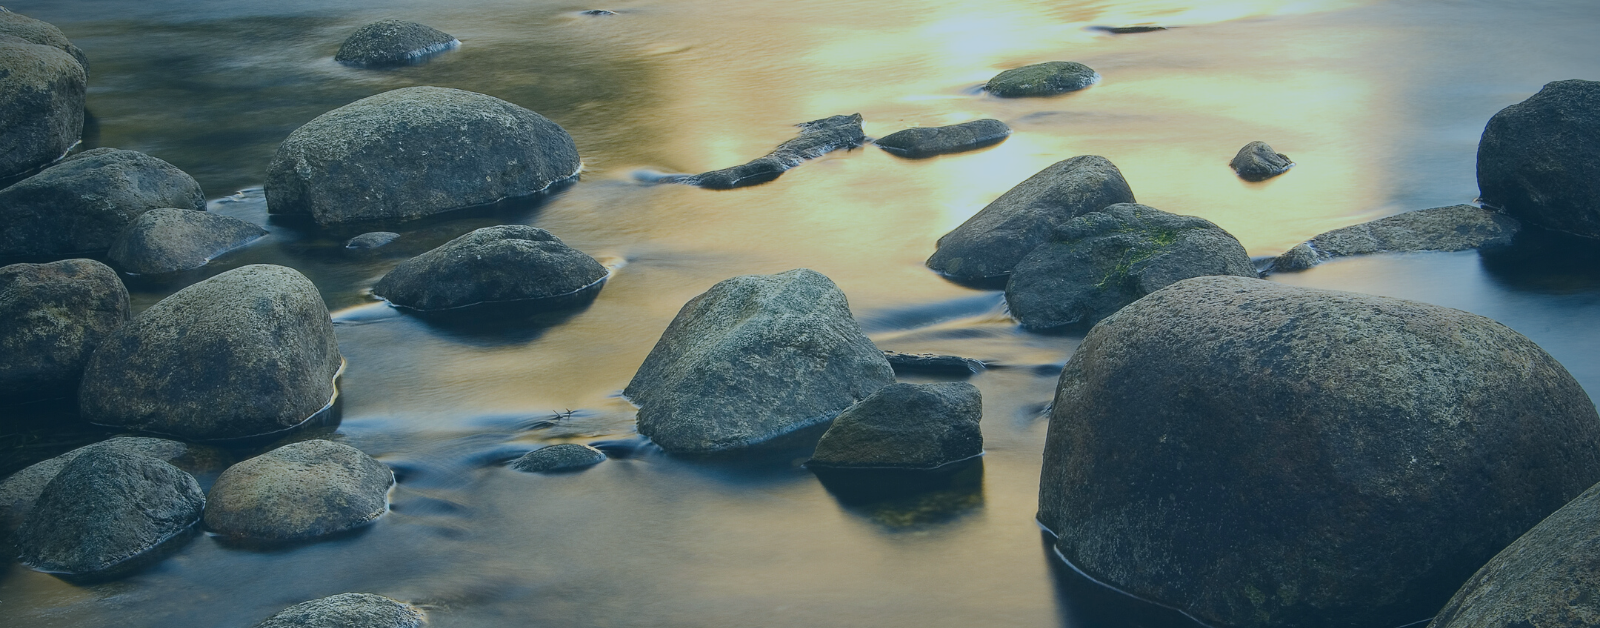 rocks in water with sun reflecting